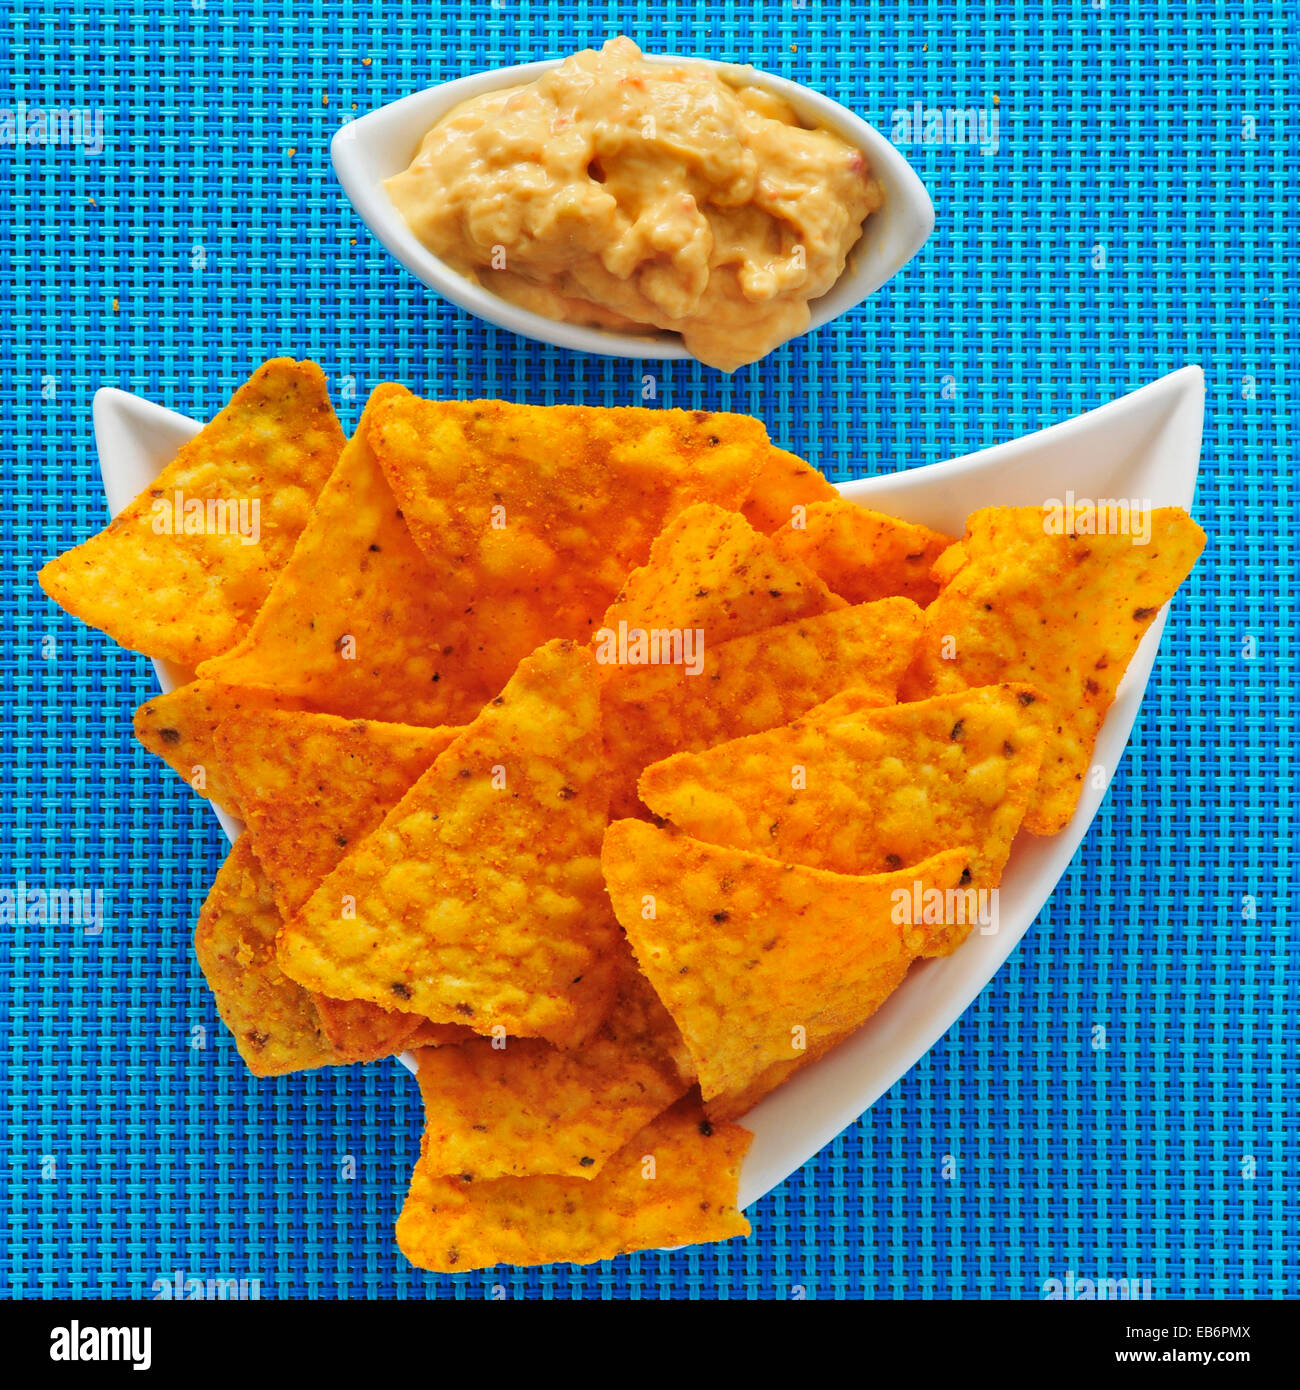 a plate with tortilla chips and a bowl with hummus, on a blue fabric background Stock Photo